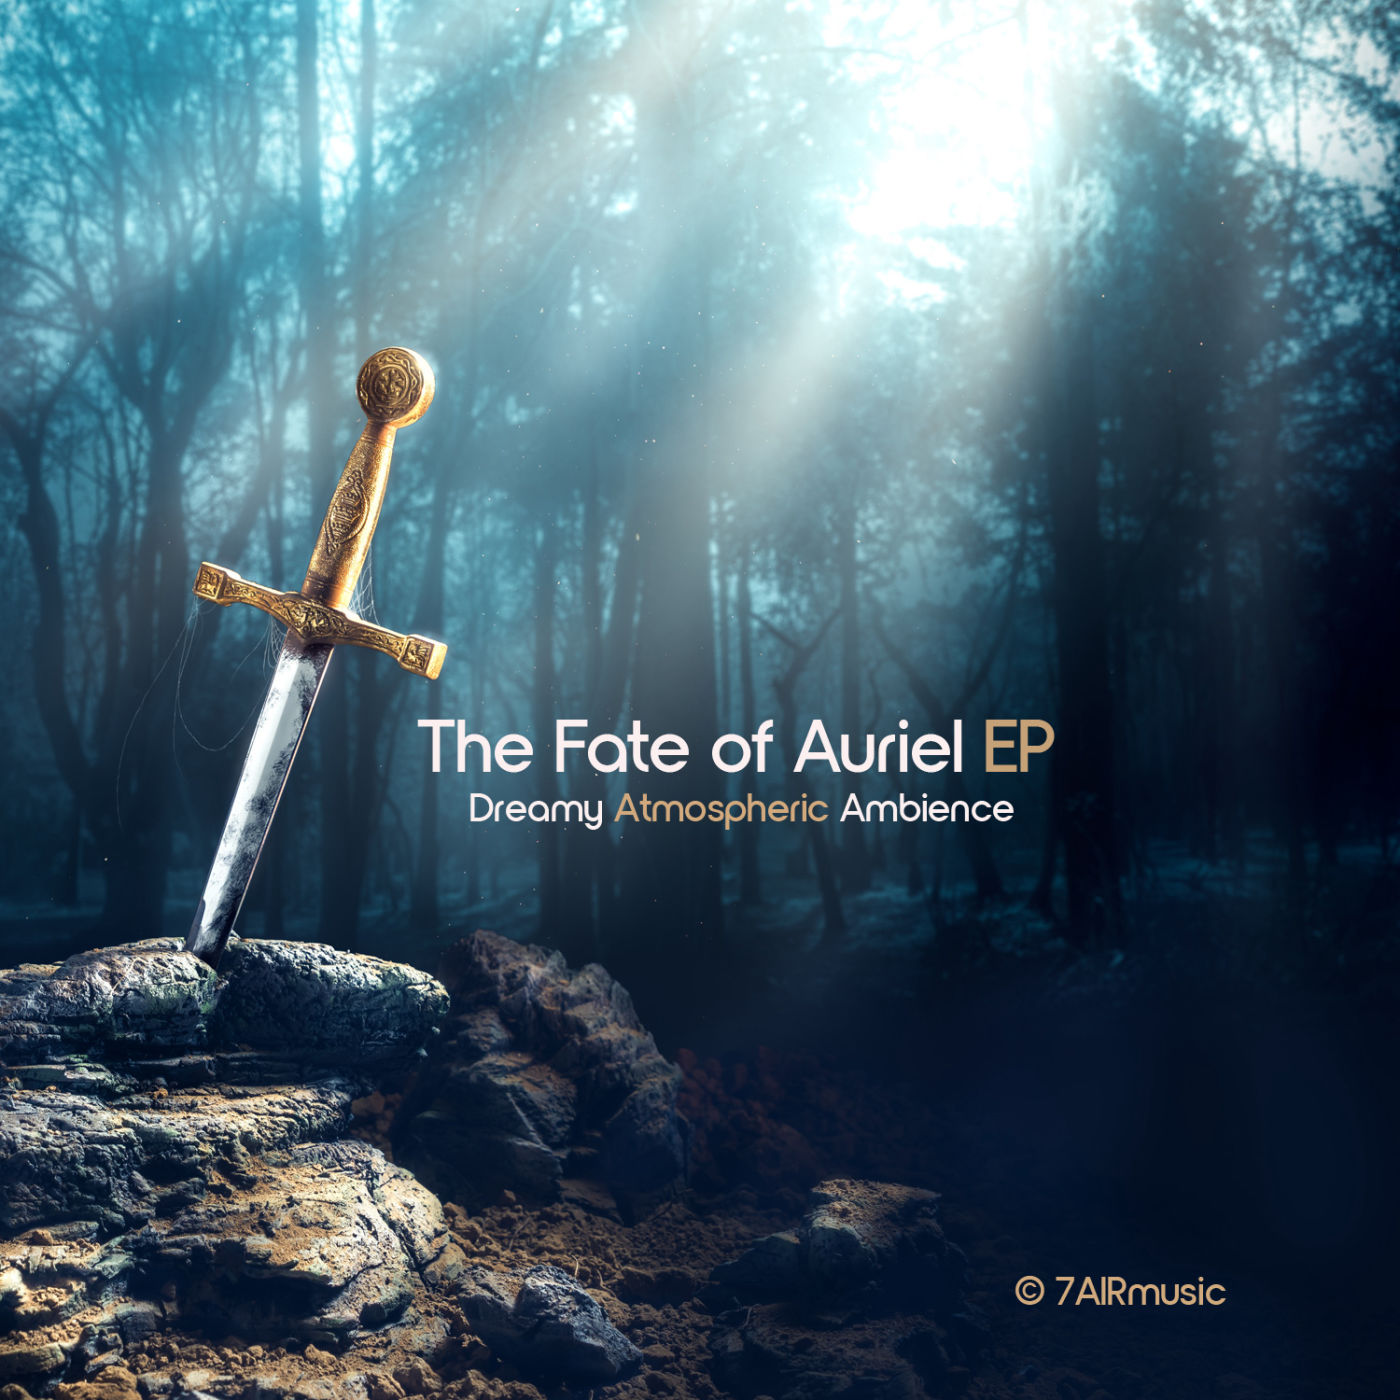 The Fate of Auriel EP